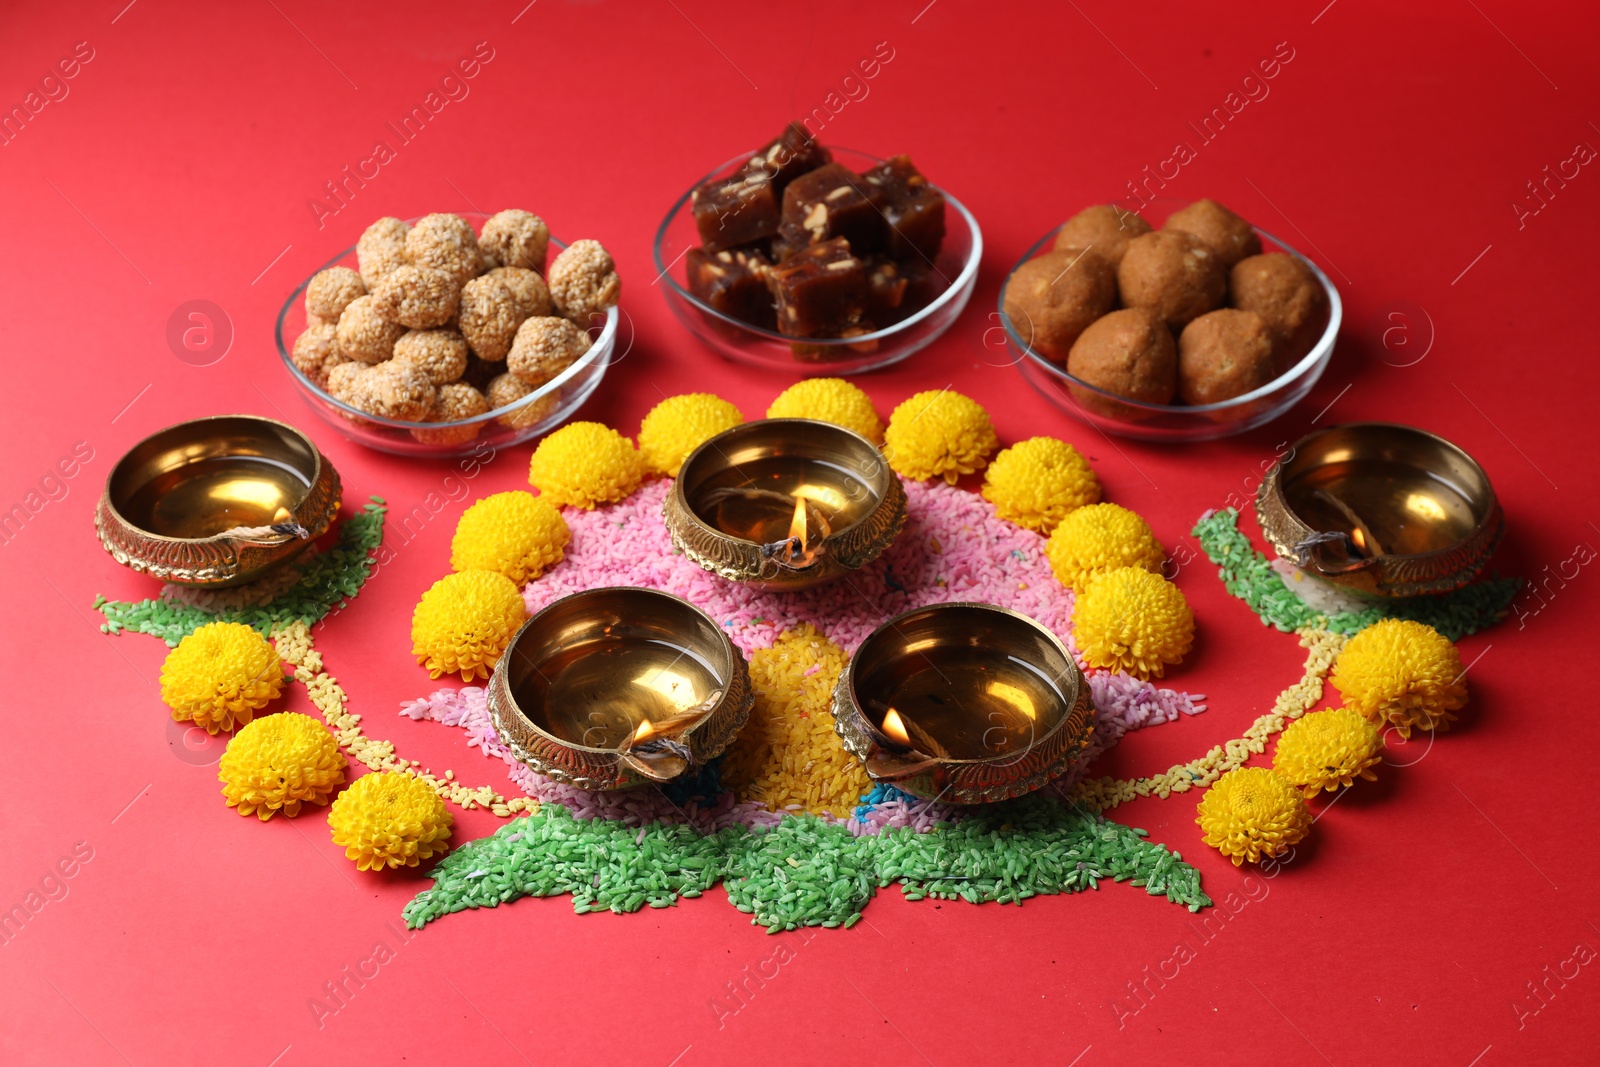 Photo of Happy Diwali. Diya lamps, colorful rangoli, flowers and delicious Indian sweets on red table